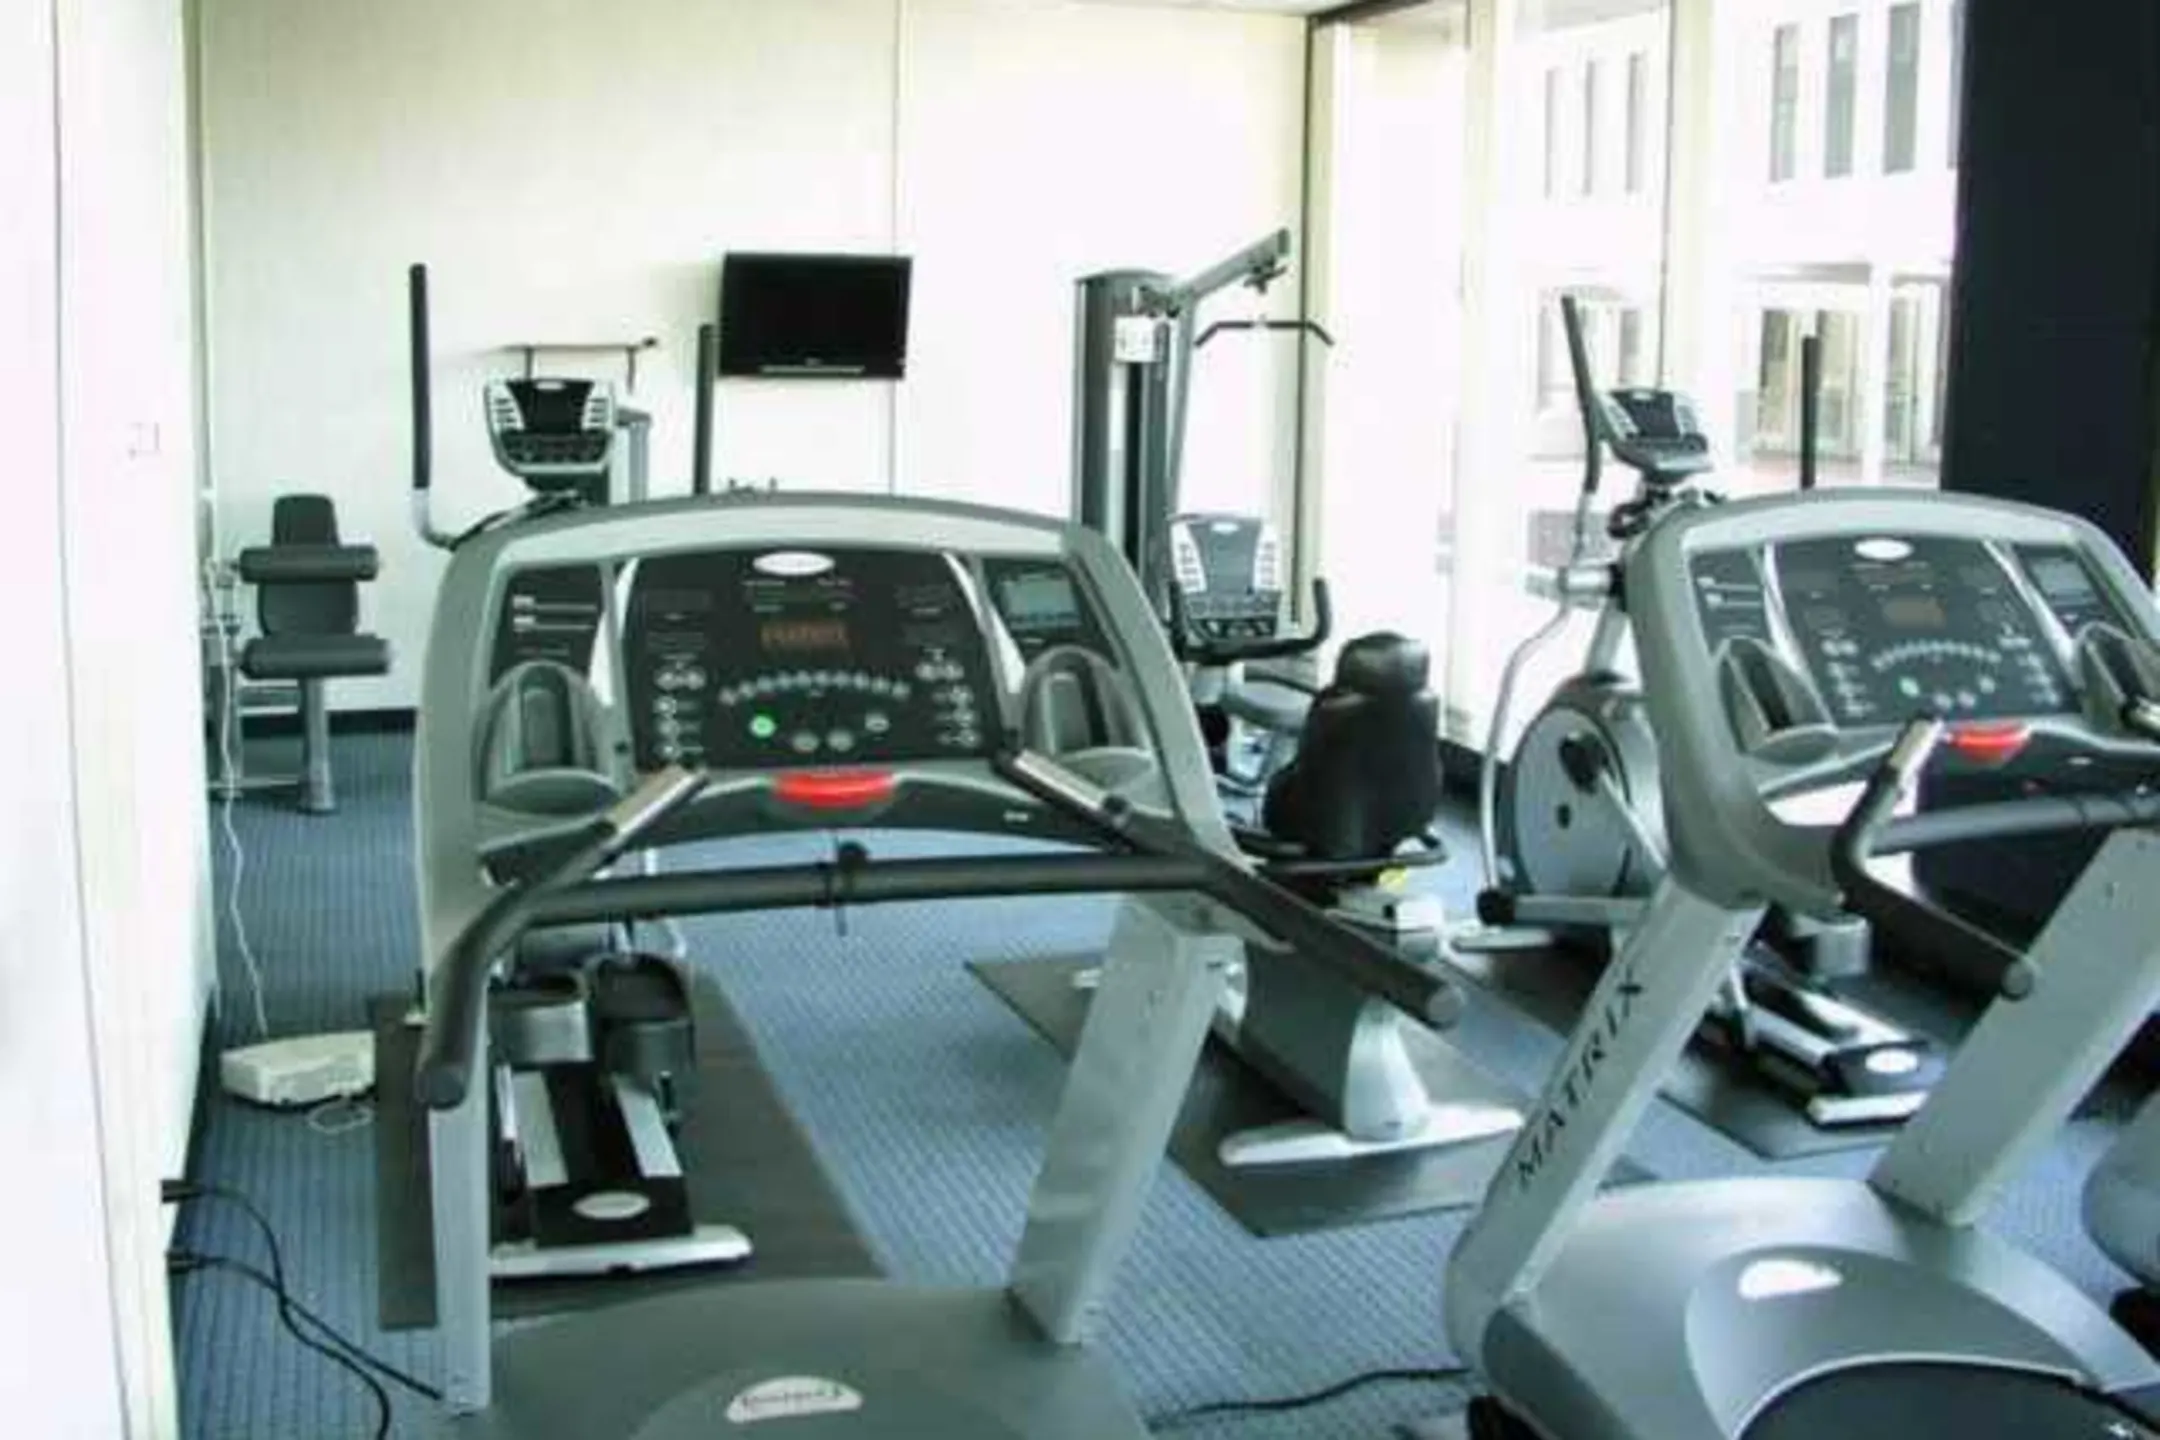 Fitness Weight Room - The Gentry's Landing - Saint Louis, MO